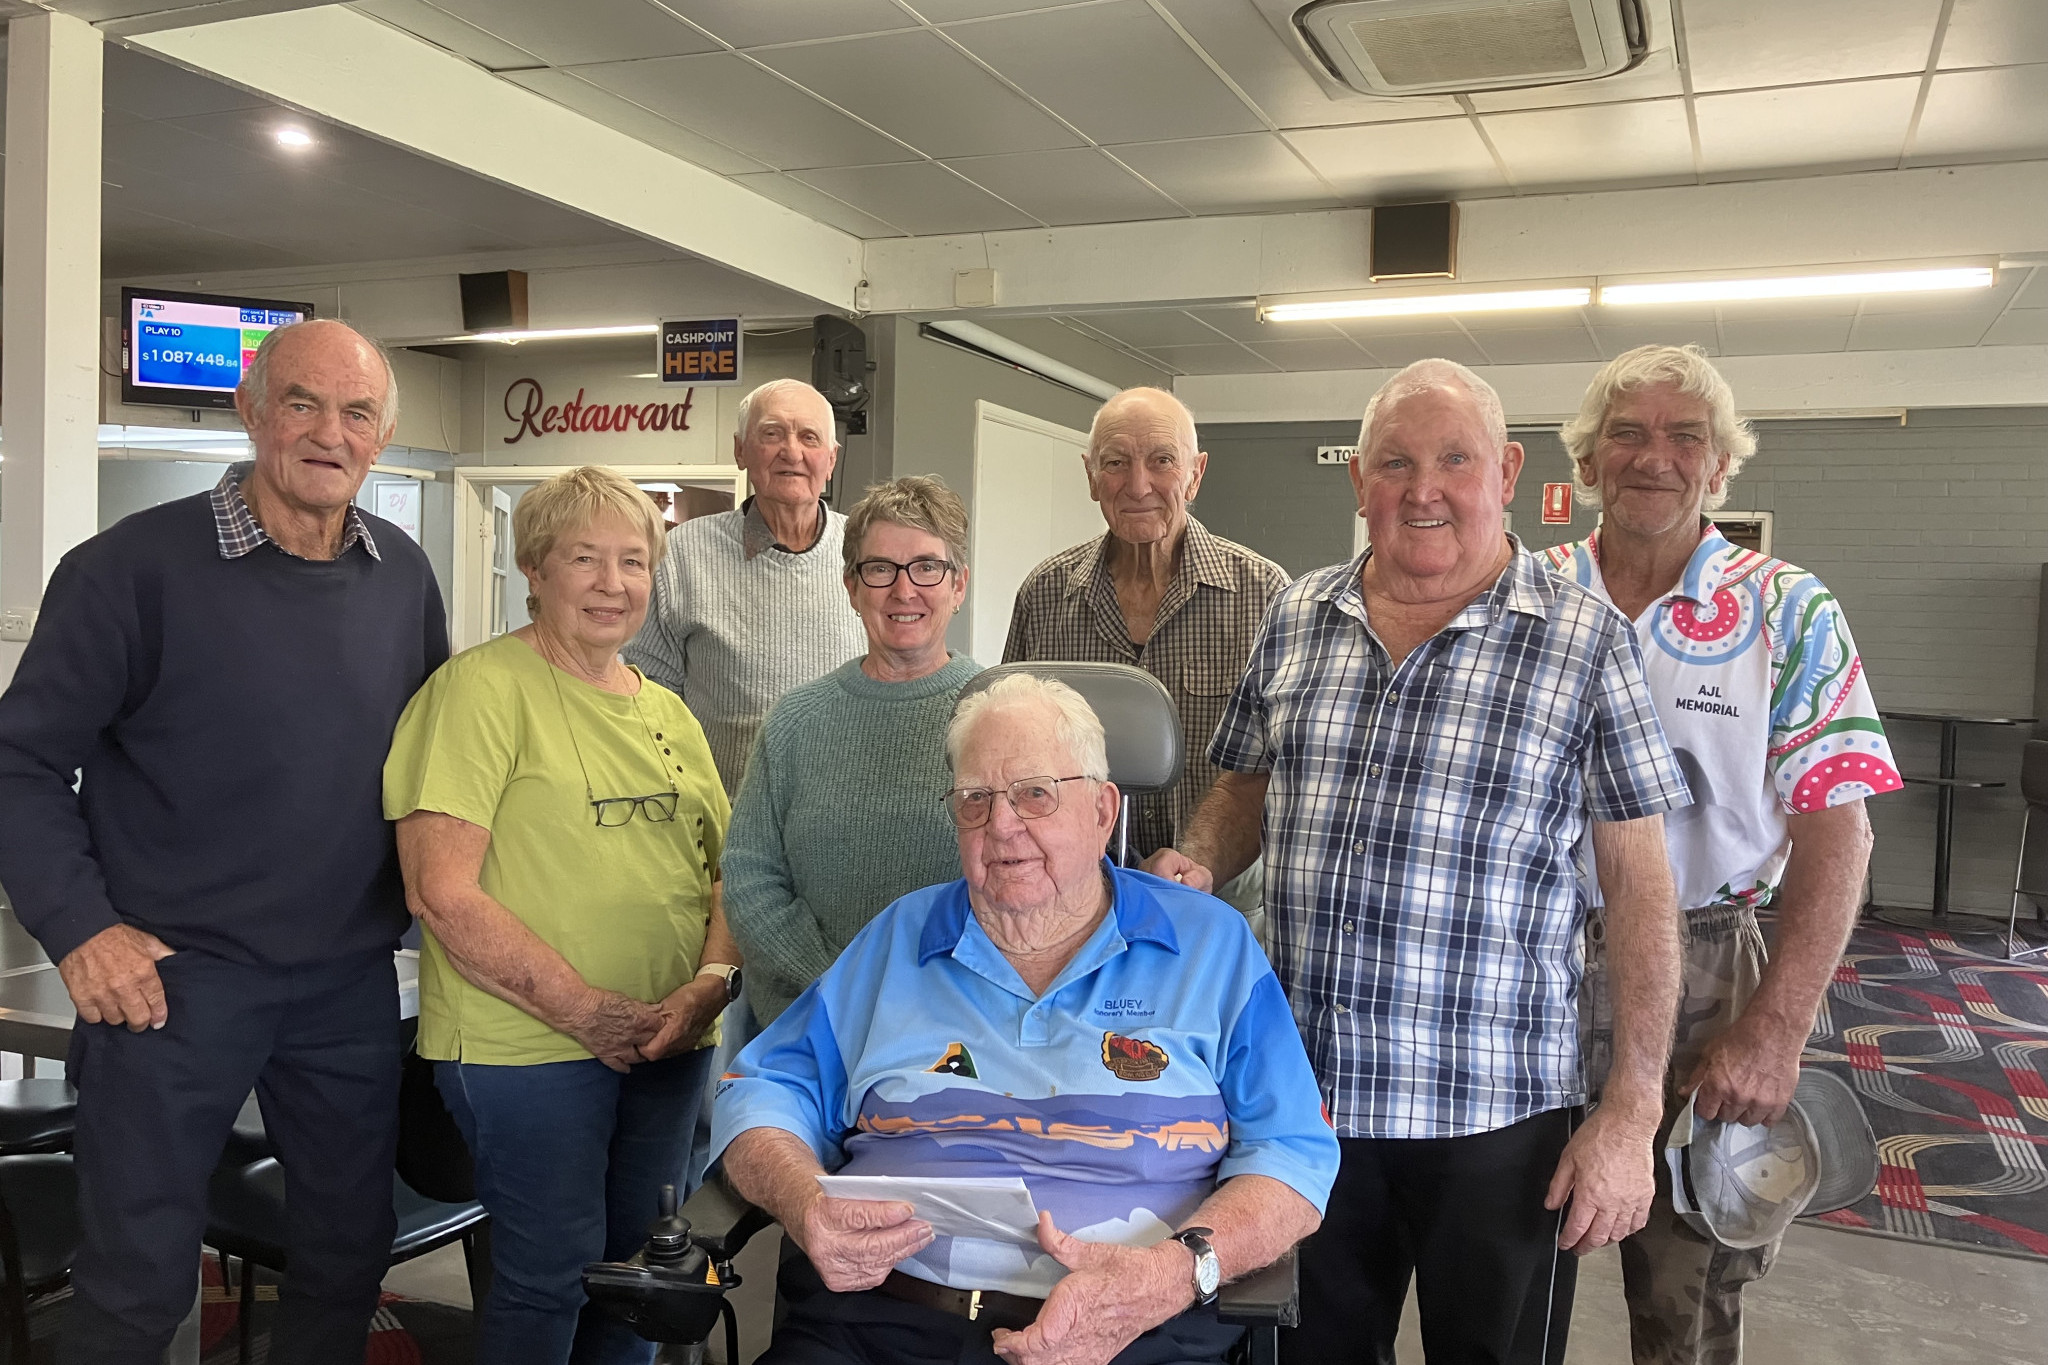 Kevin ‘Blue’ Milgate (front and centre) turned 99 years young on Friday, May 3 and celebrated with a lunch at Gilgandra Sporties. He had another lunch the next day with his family at The Sporties. Photo: Supplied.